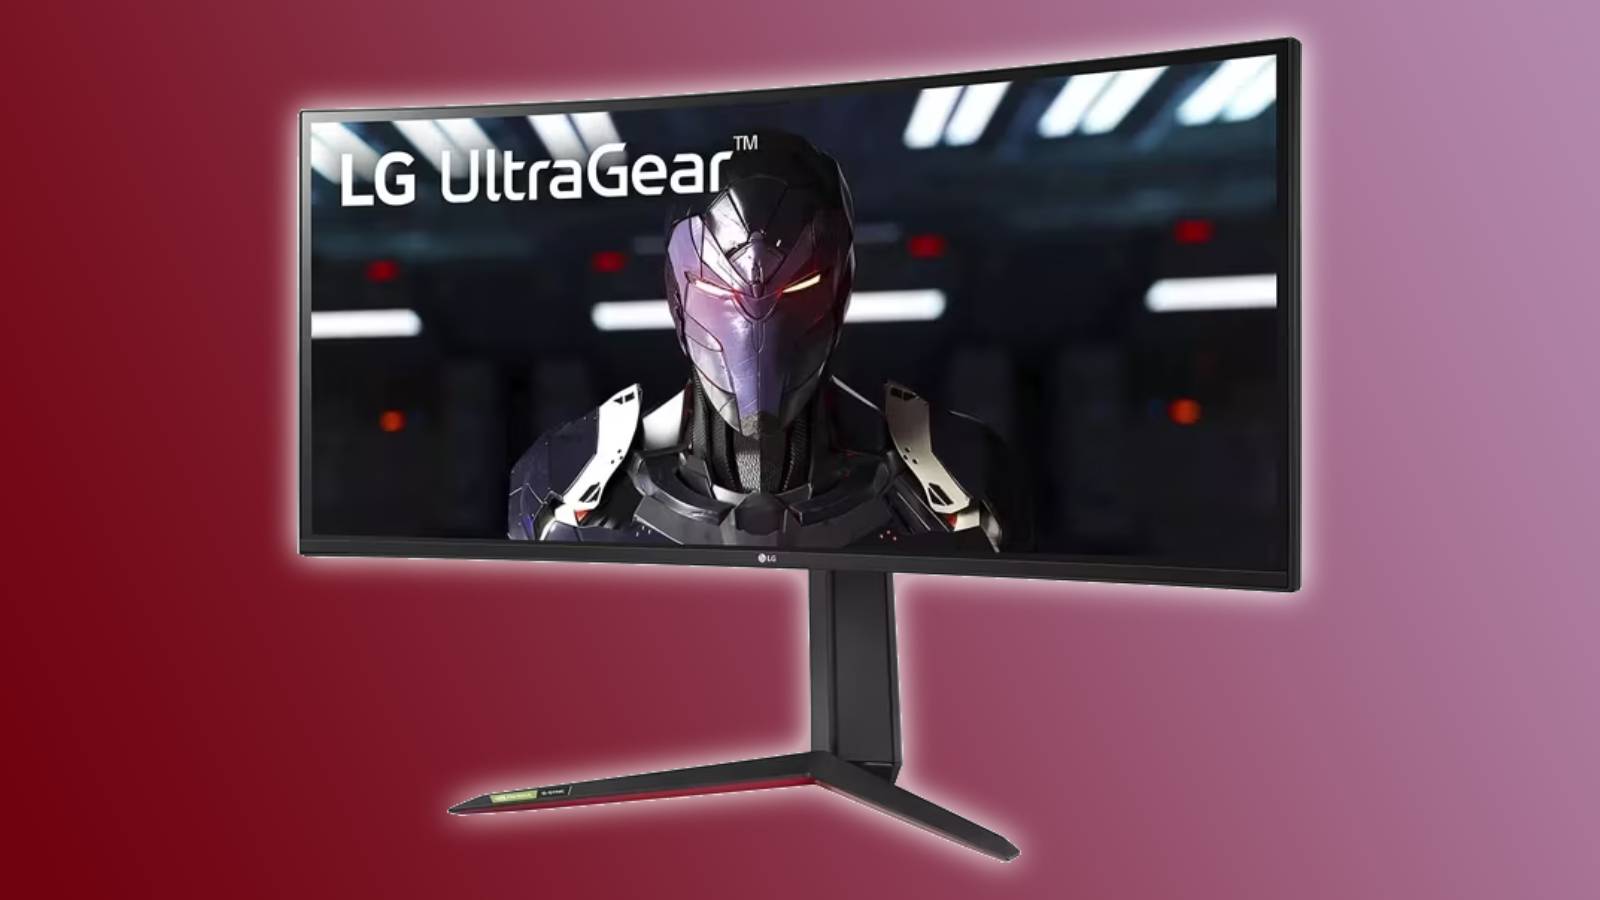 Image of the LG UltraGear QHD 34-Inch Curved Gaming Monitor 34GP83A-B on a red and pink background.